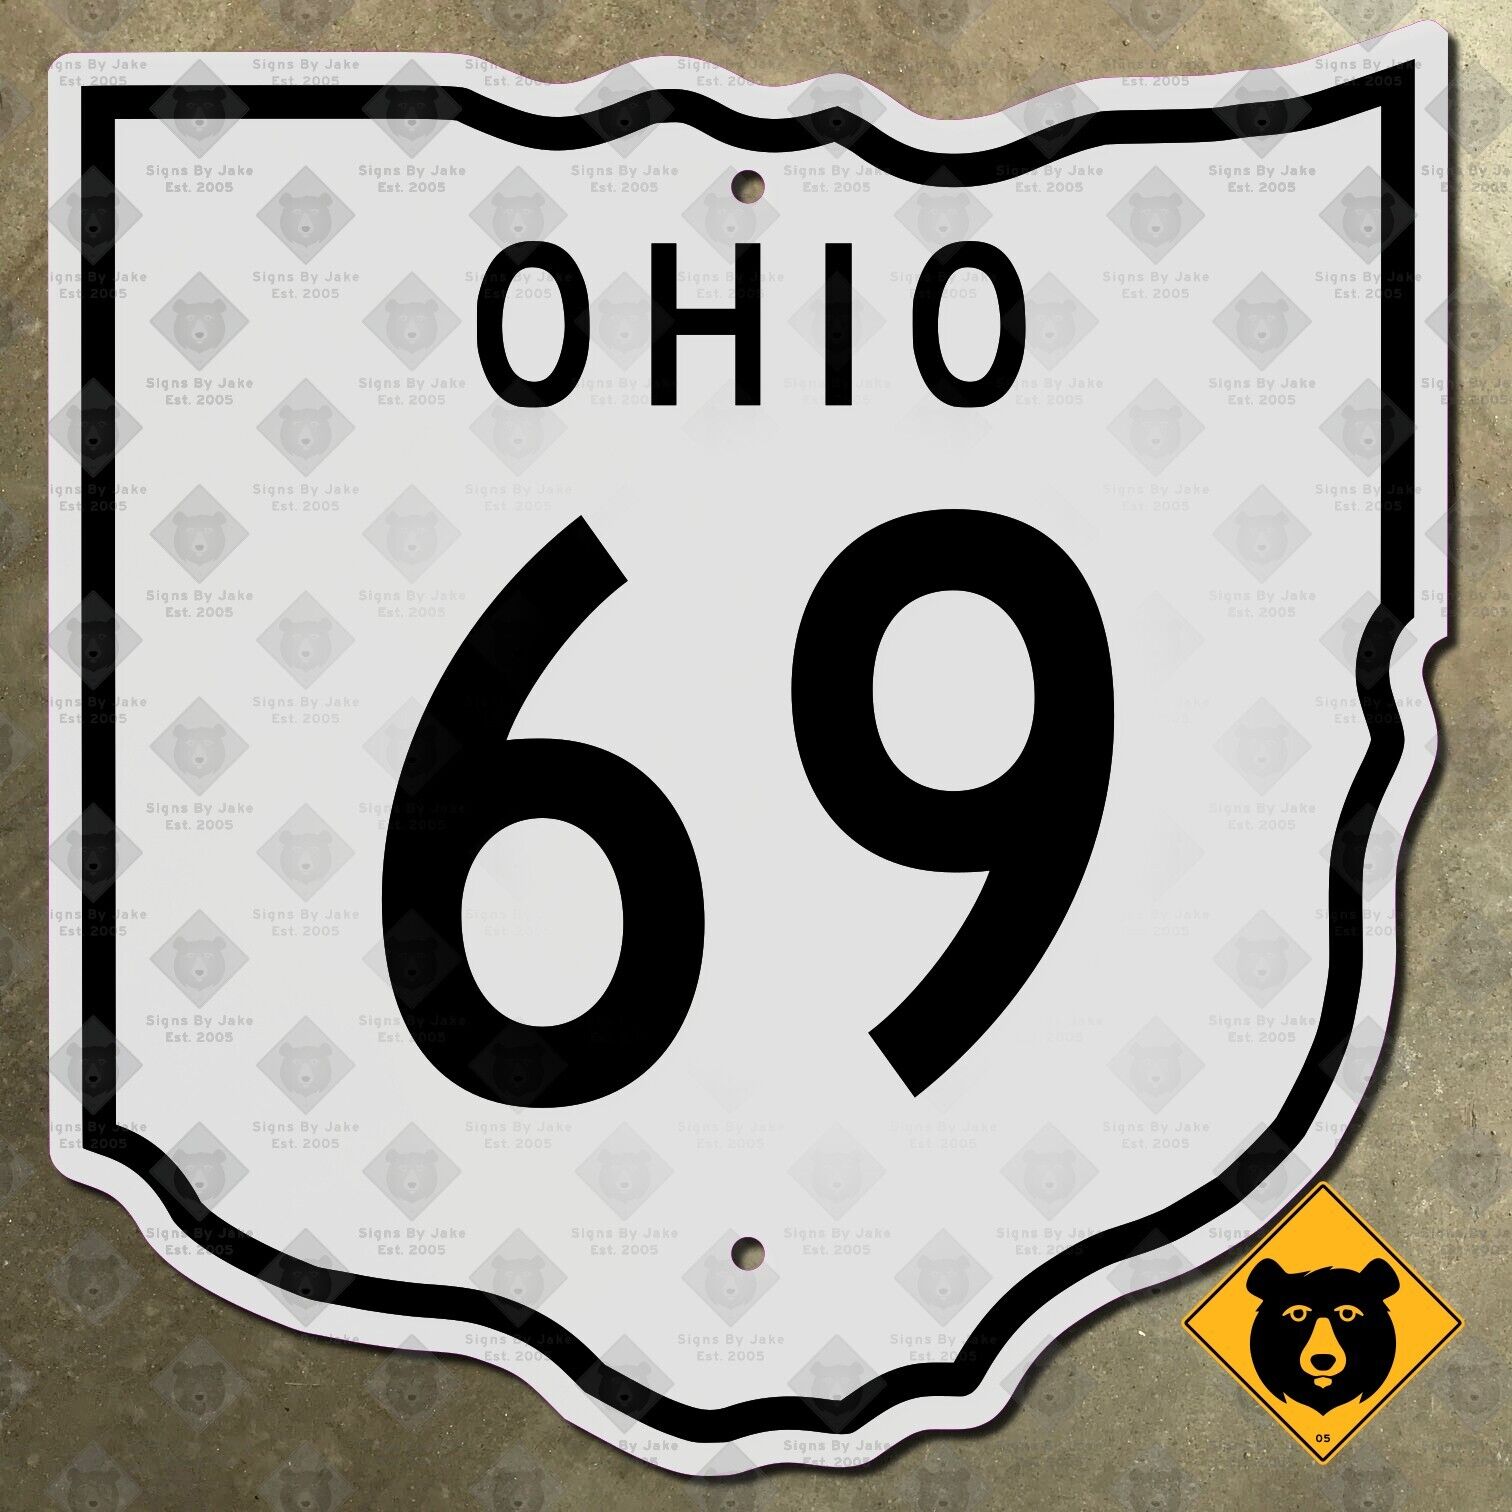 Ohio state route 69 highway marker road sign diecut map outline